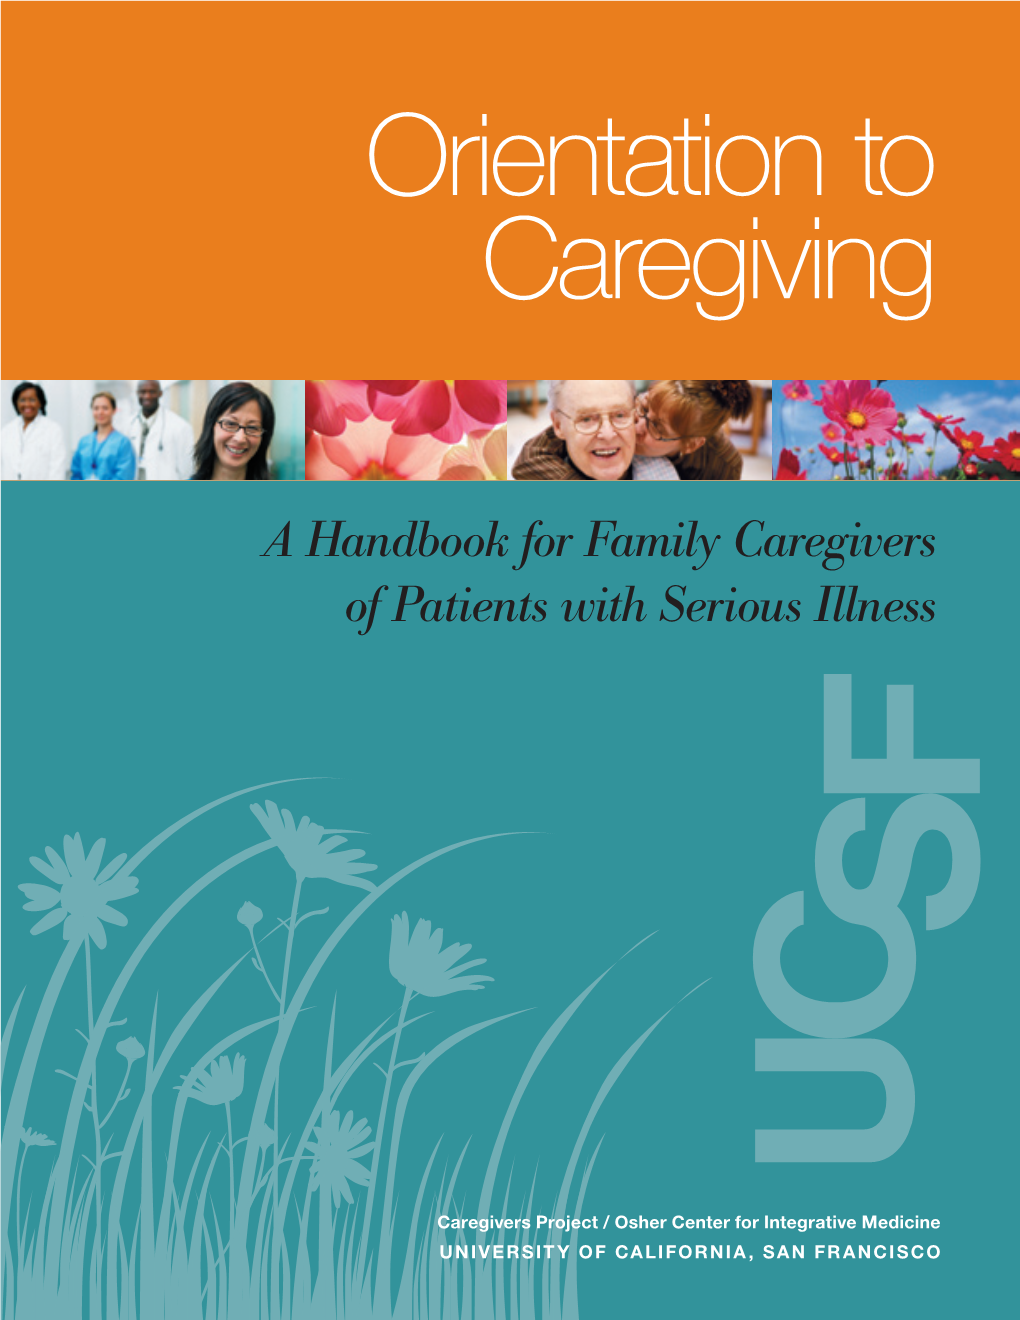 A Handbook for Family Caregivers of Patients with Serious Illness